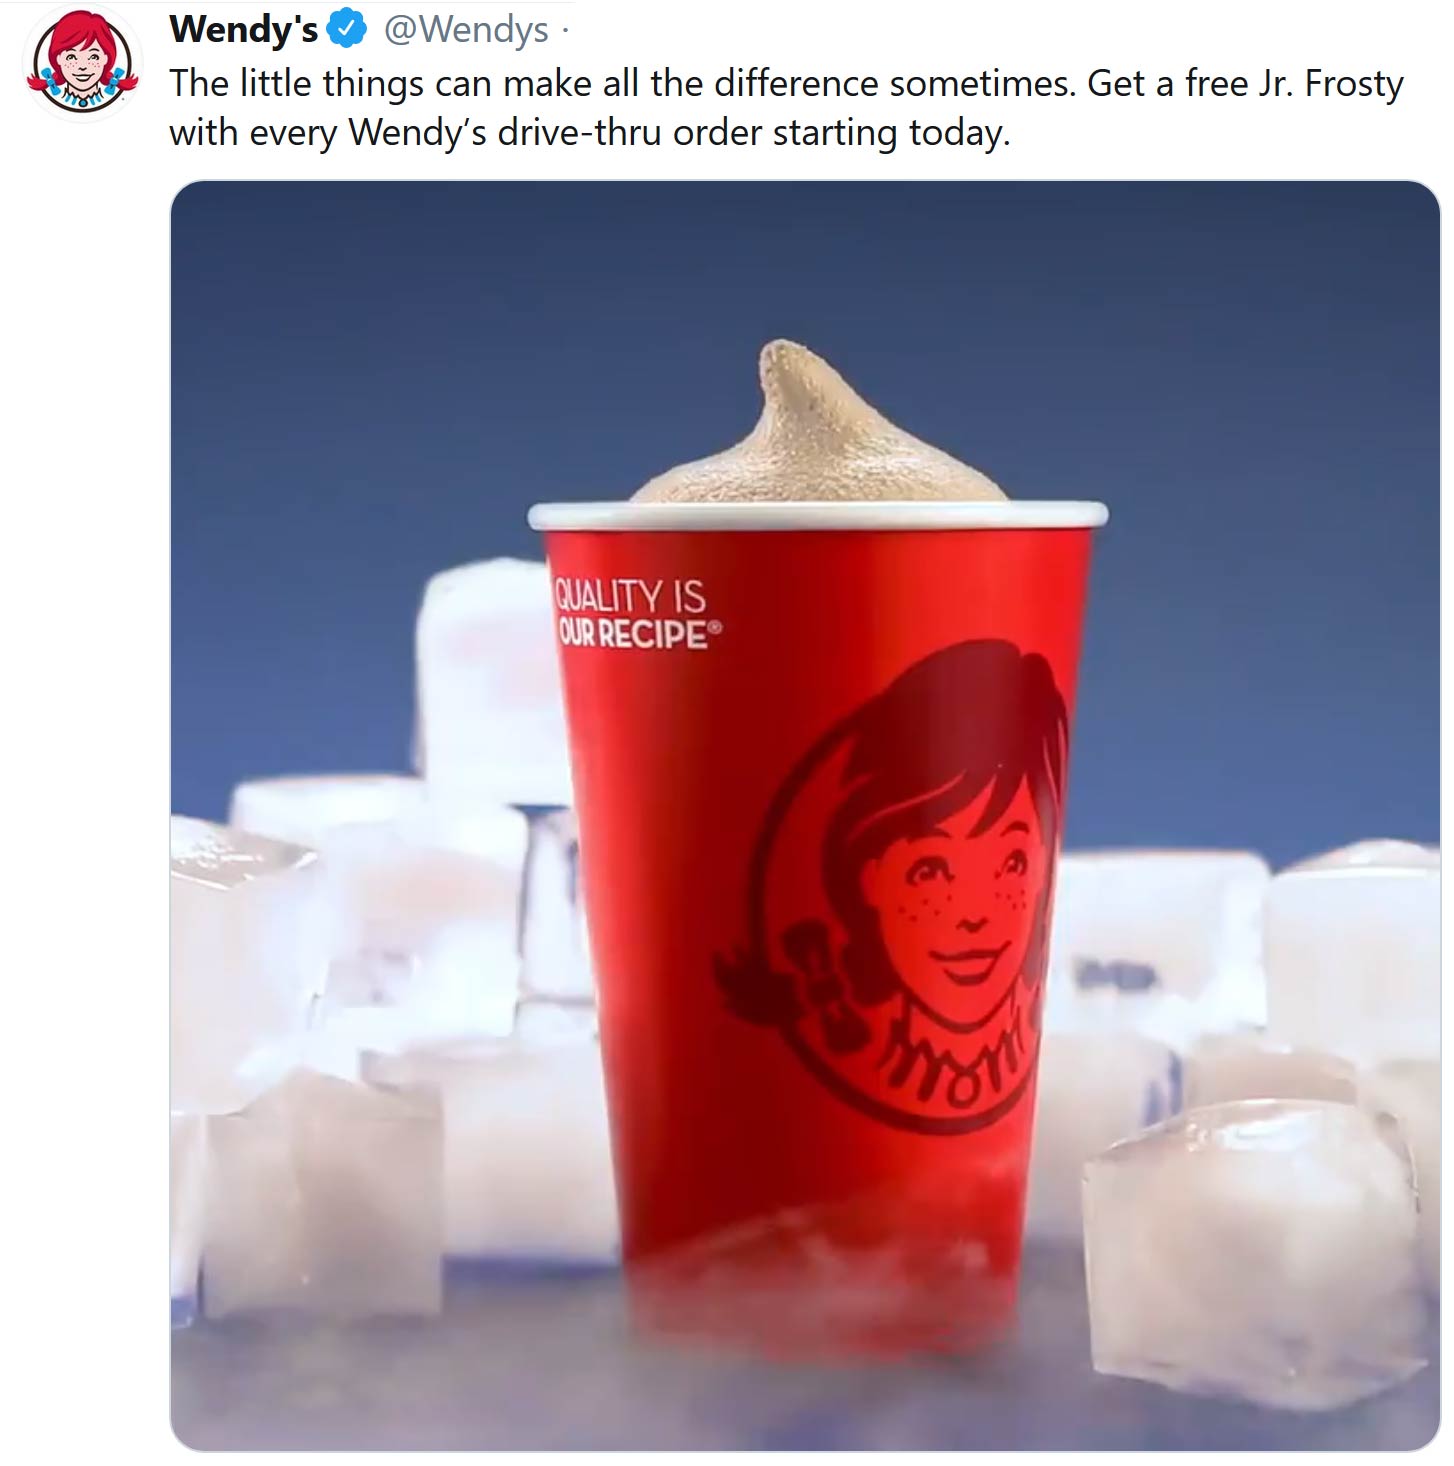 Wendys coupons & promo code for [November 2022]